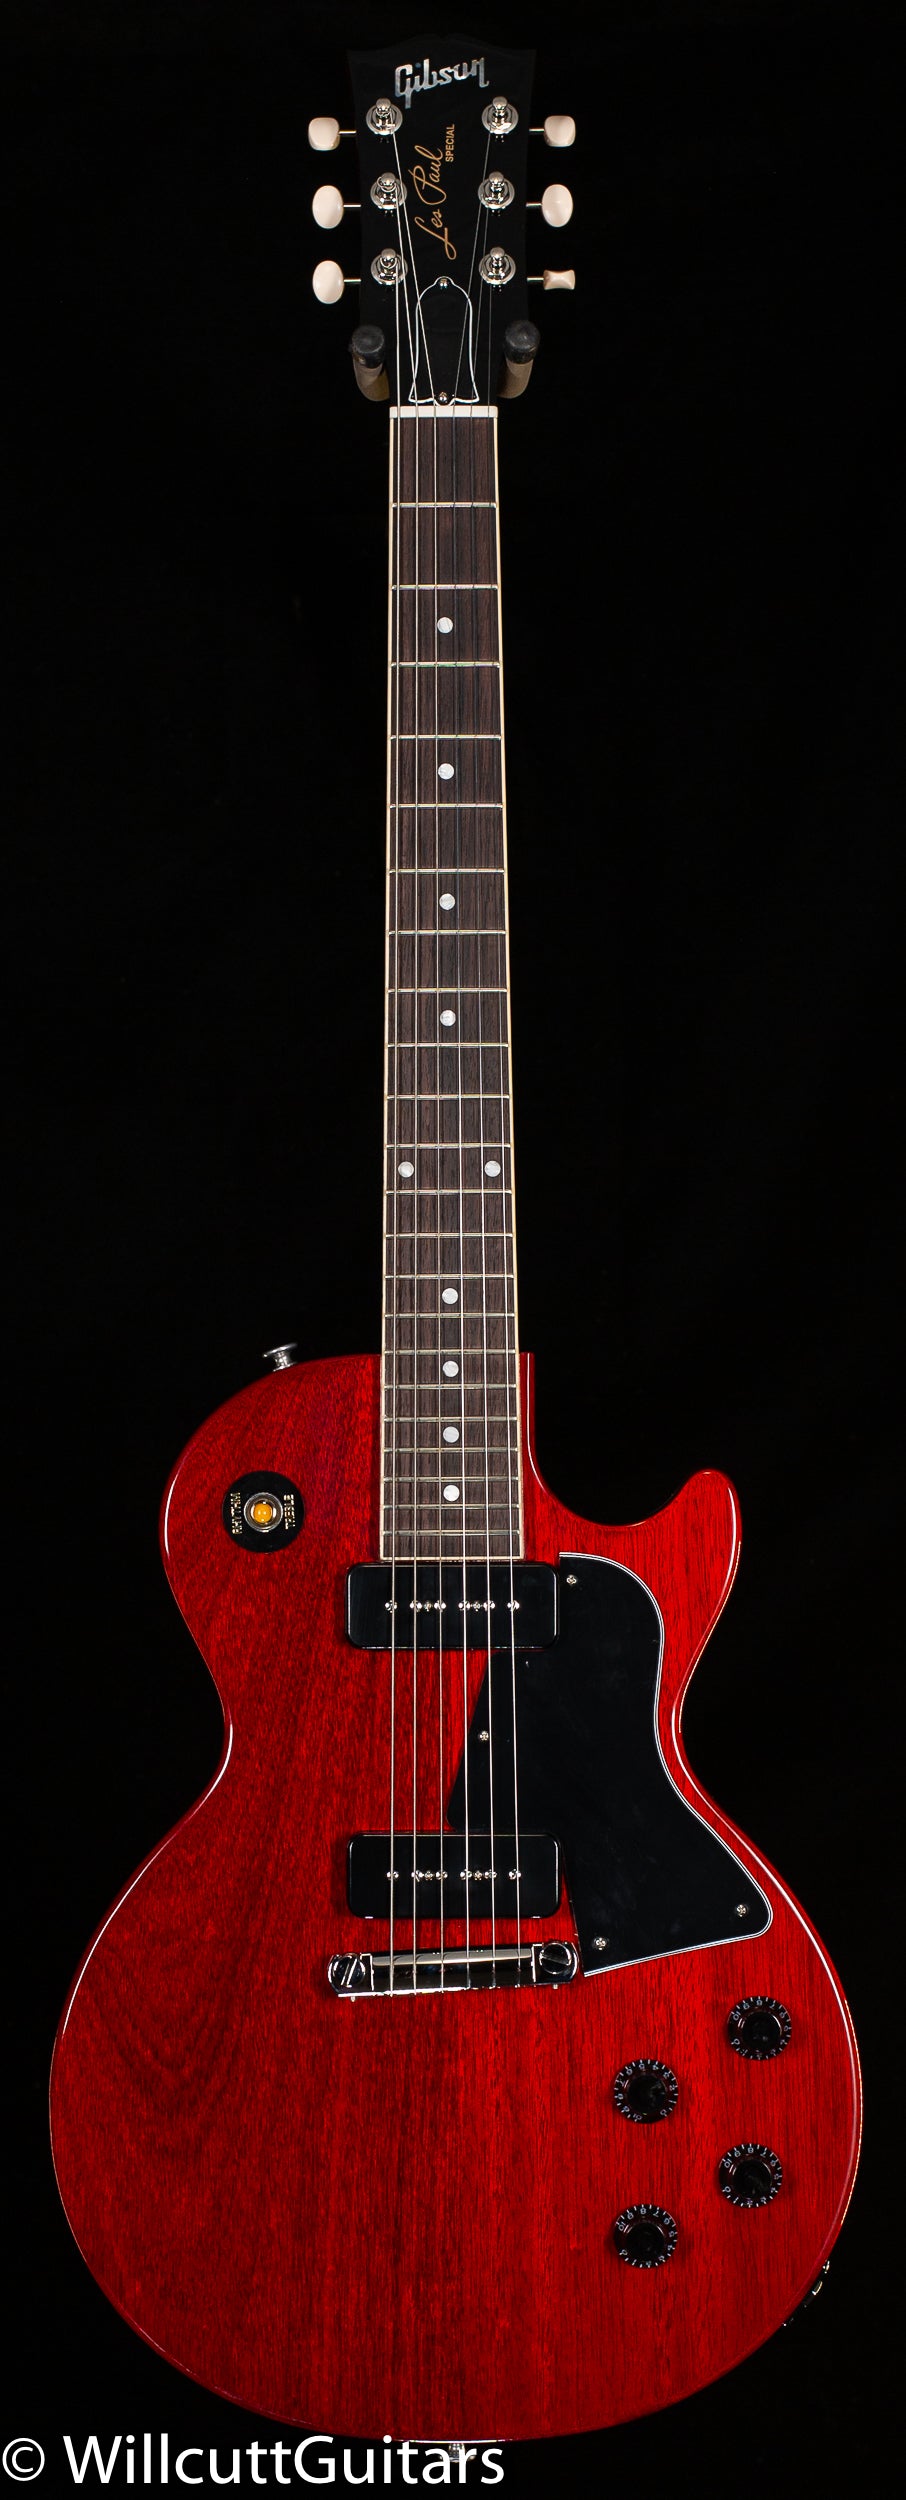 Gibson Les Paul Special Vintage Cherry (204) - Willcutt Guitars